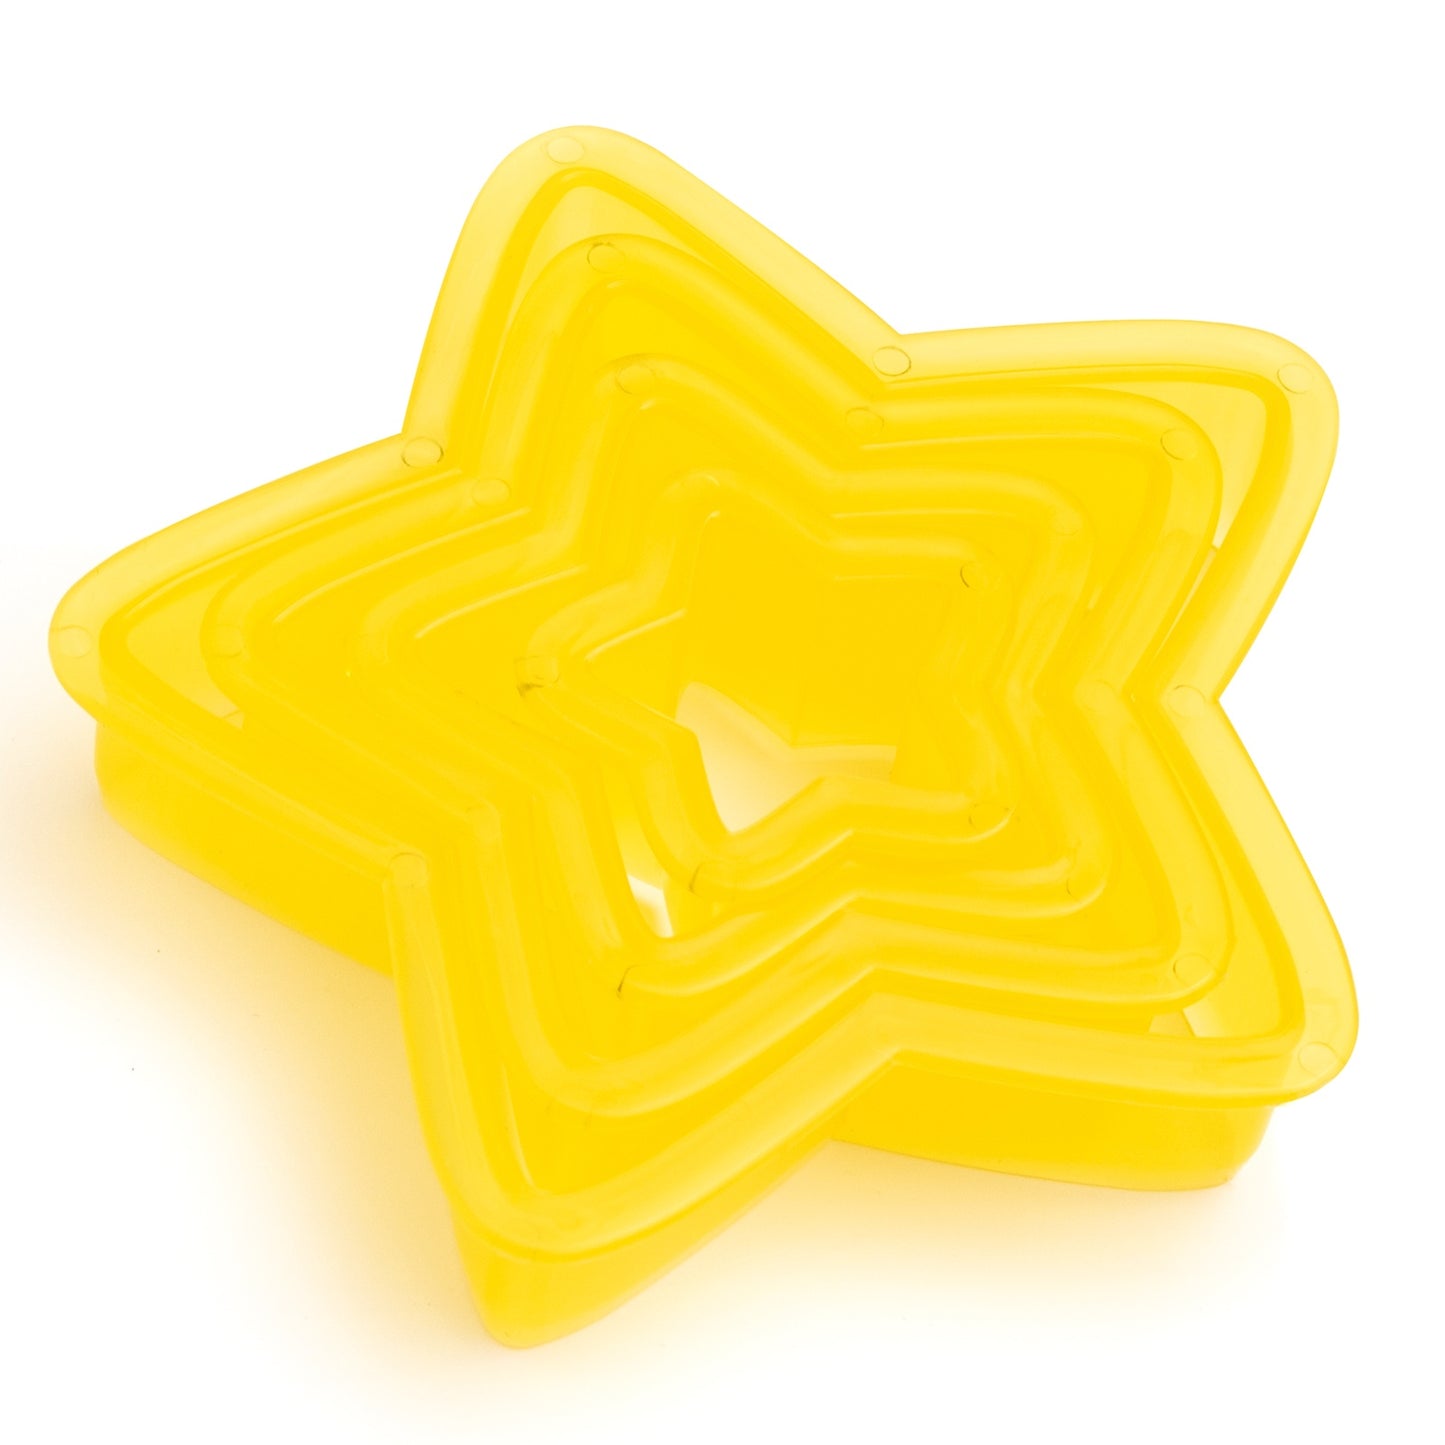 Sweet Sugarbelle Nested Cookie Cutters 4/Pkg-Star